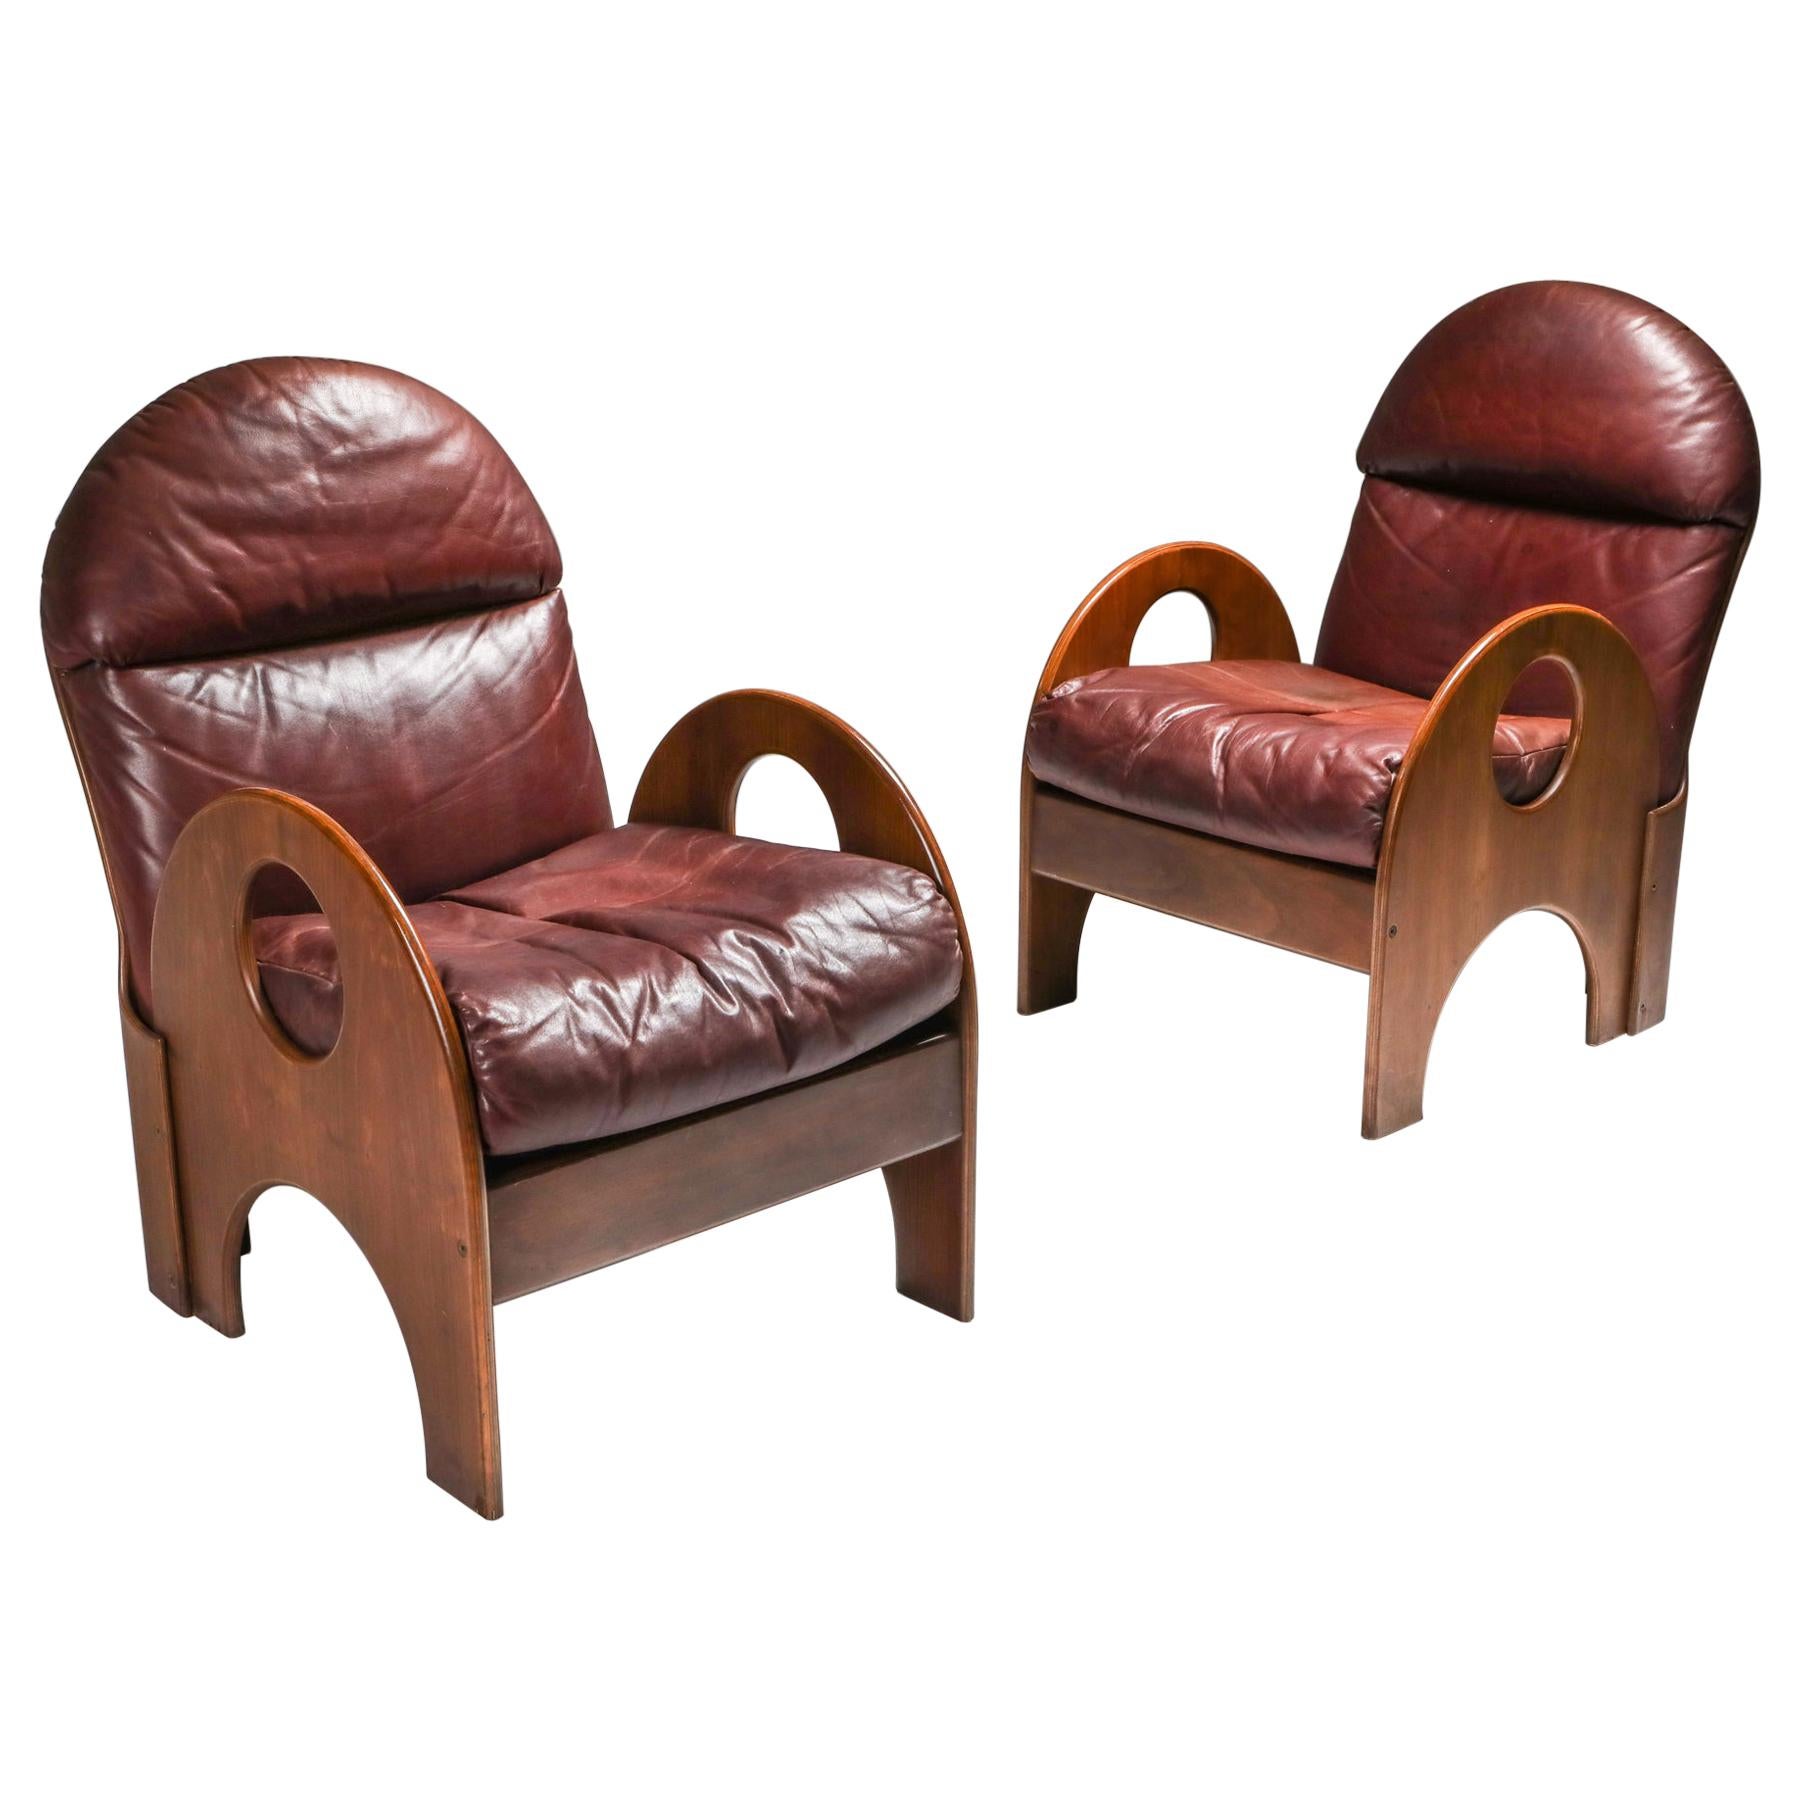 Gae Aulenti Pair of "Arcata" Easy Chairs in Walnut and Burgundy Leather